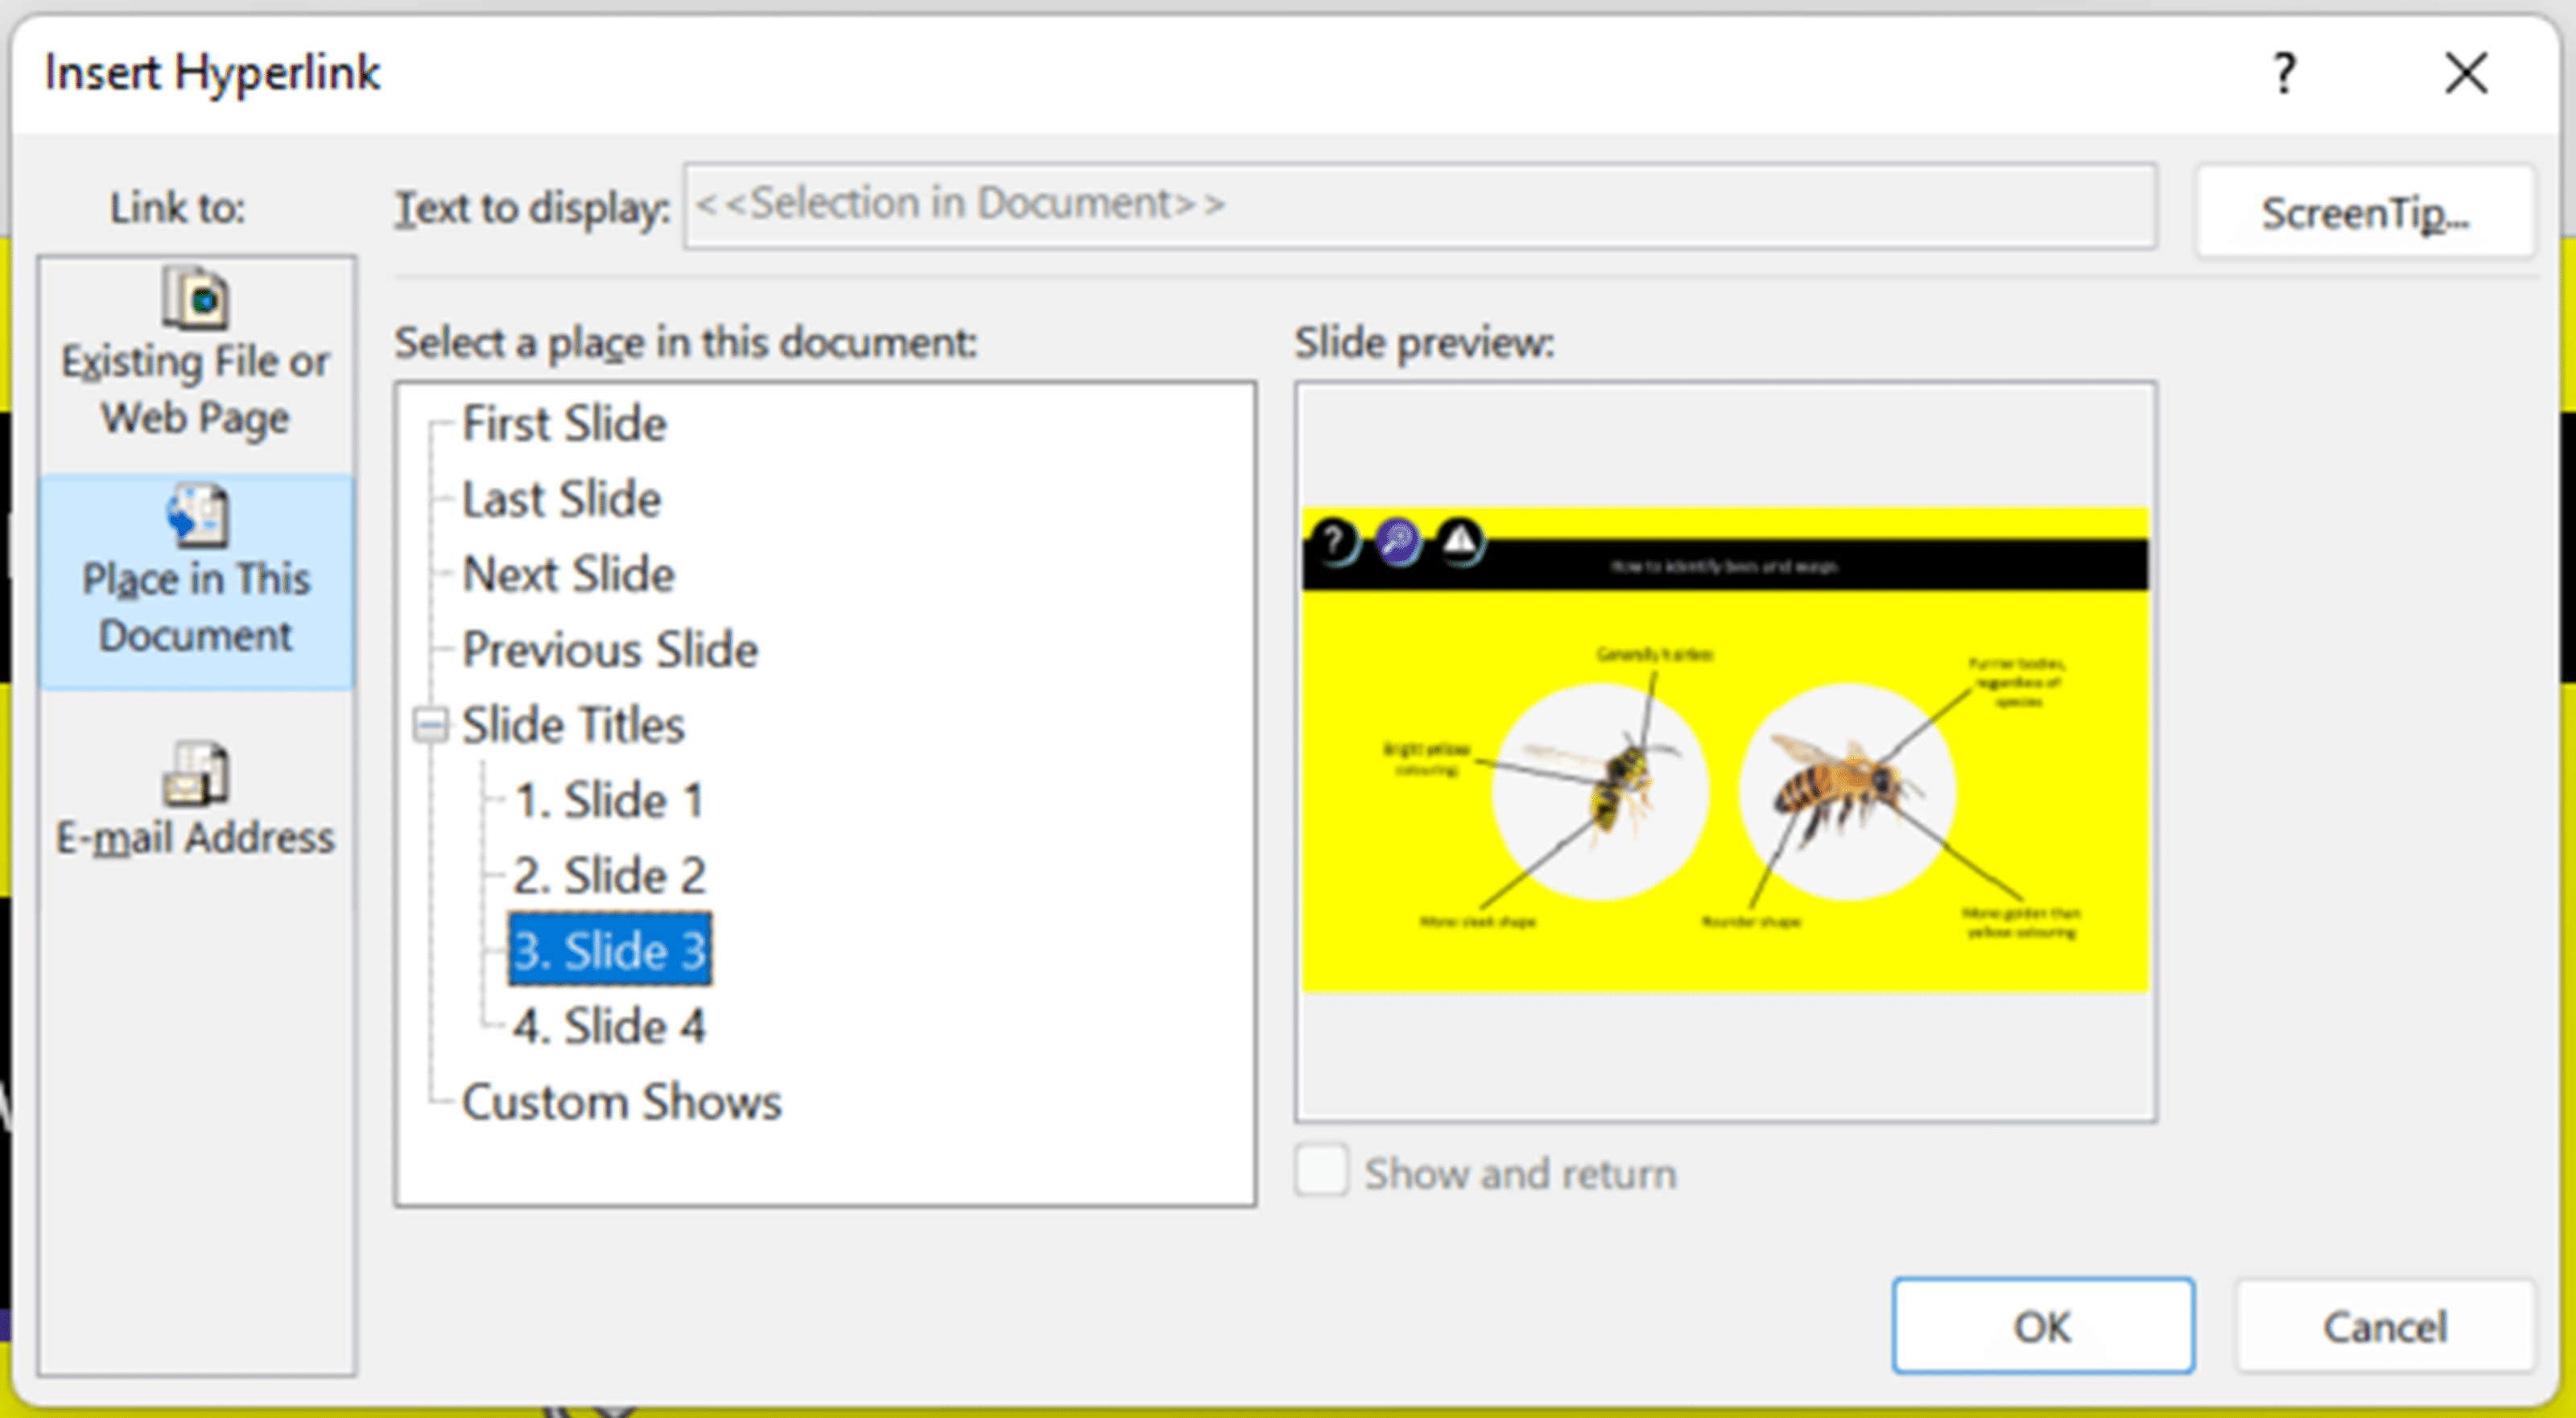 Screenshot of the 'insert hyperlink' pop-up box in PowerPoint, with Slide 3 highlighted. 